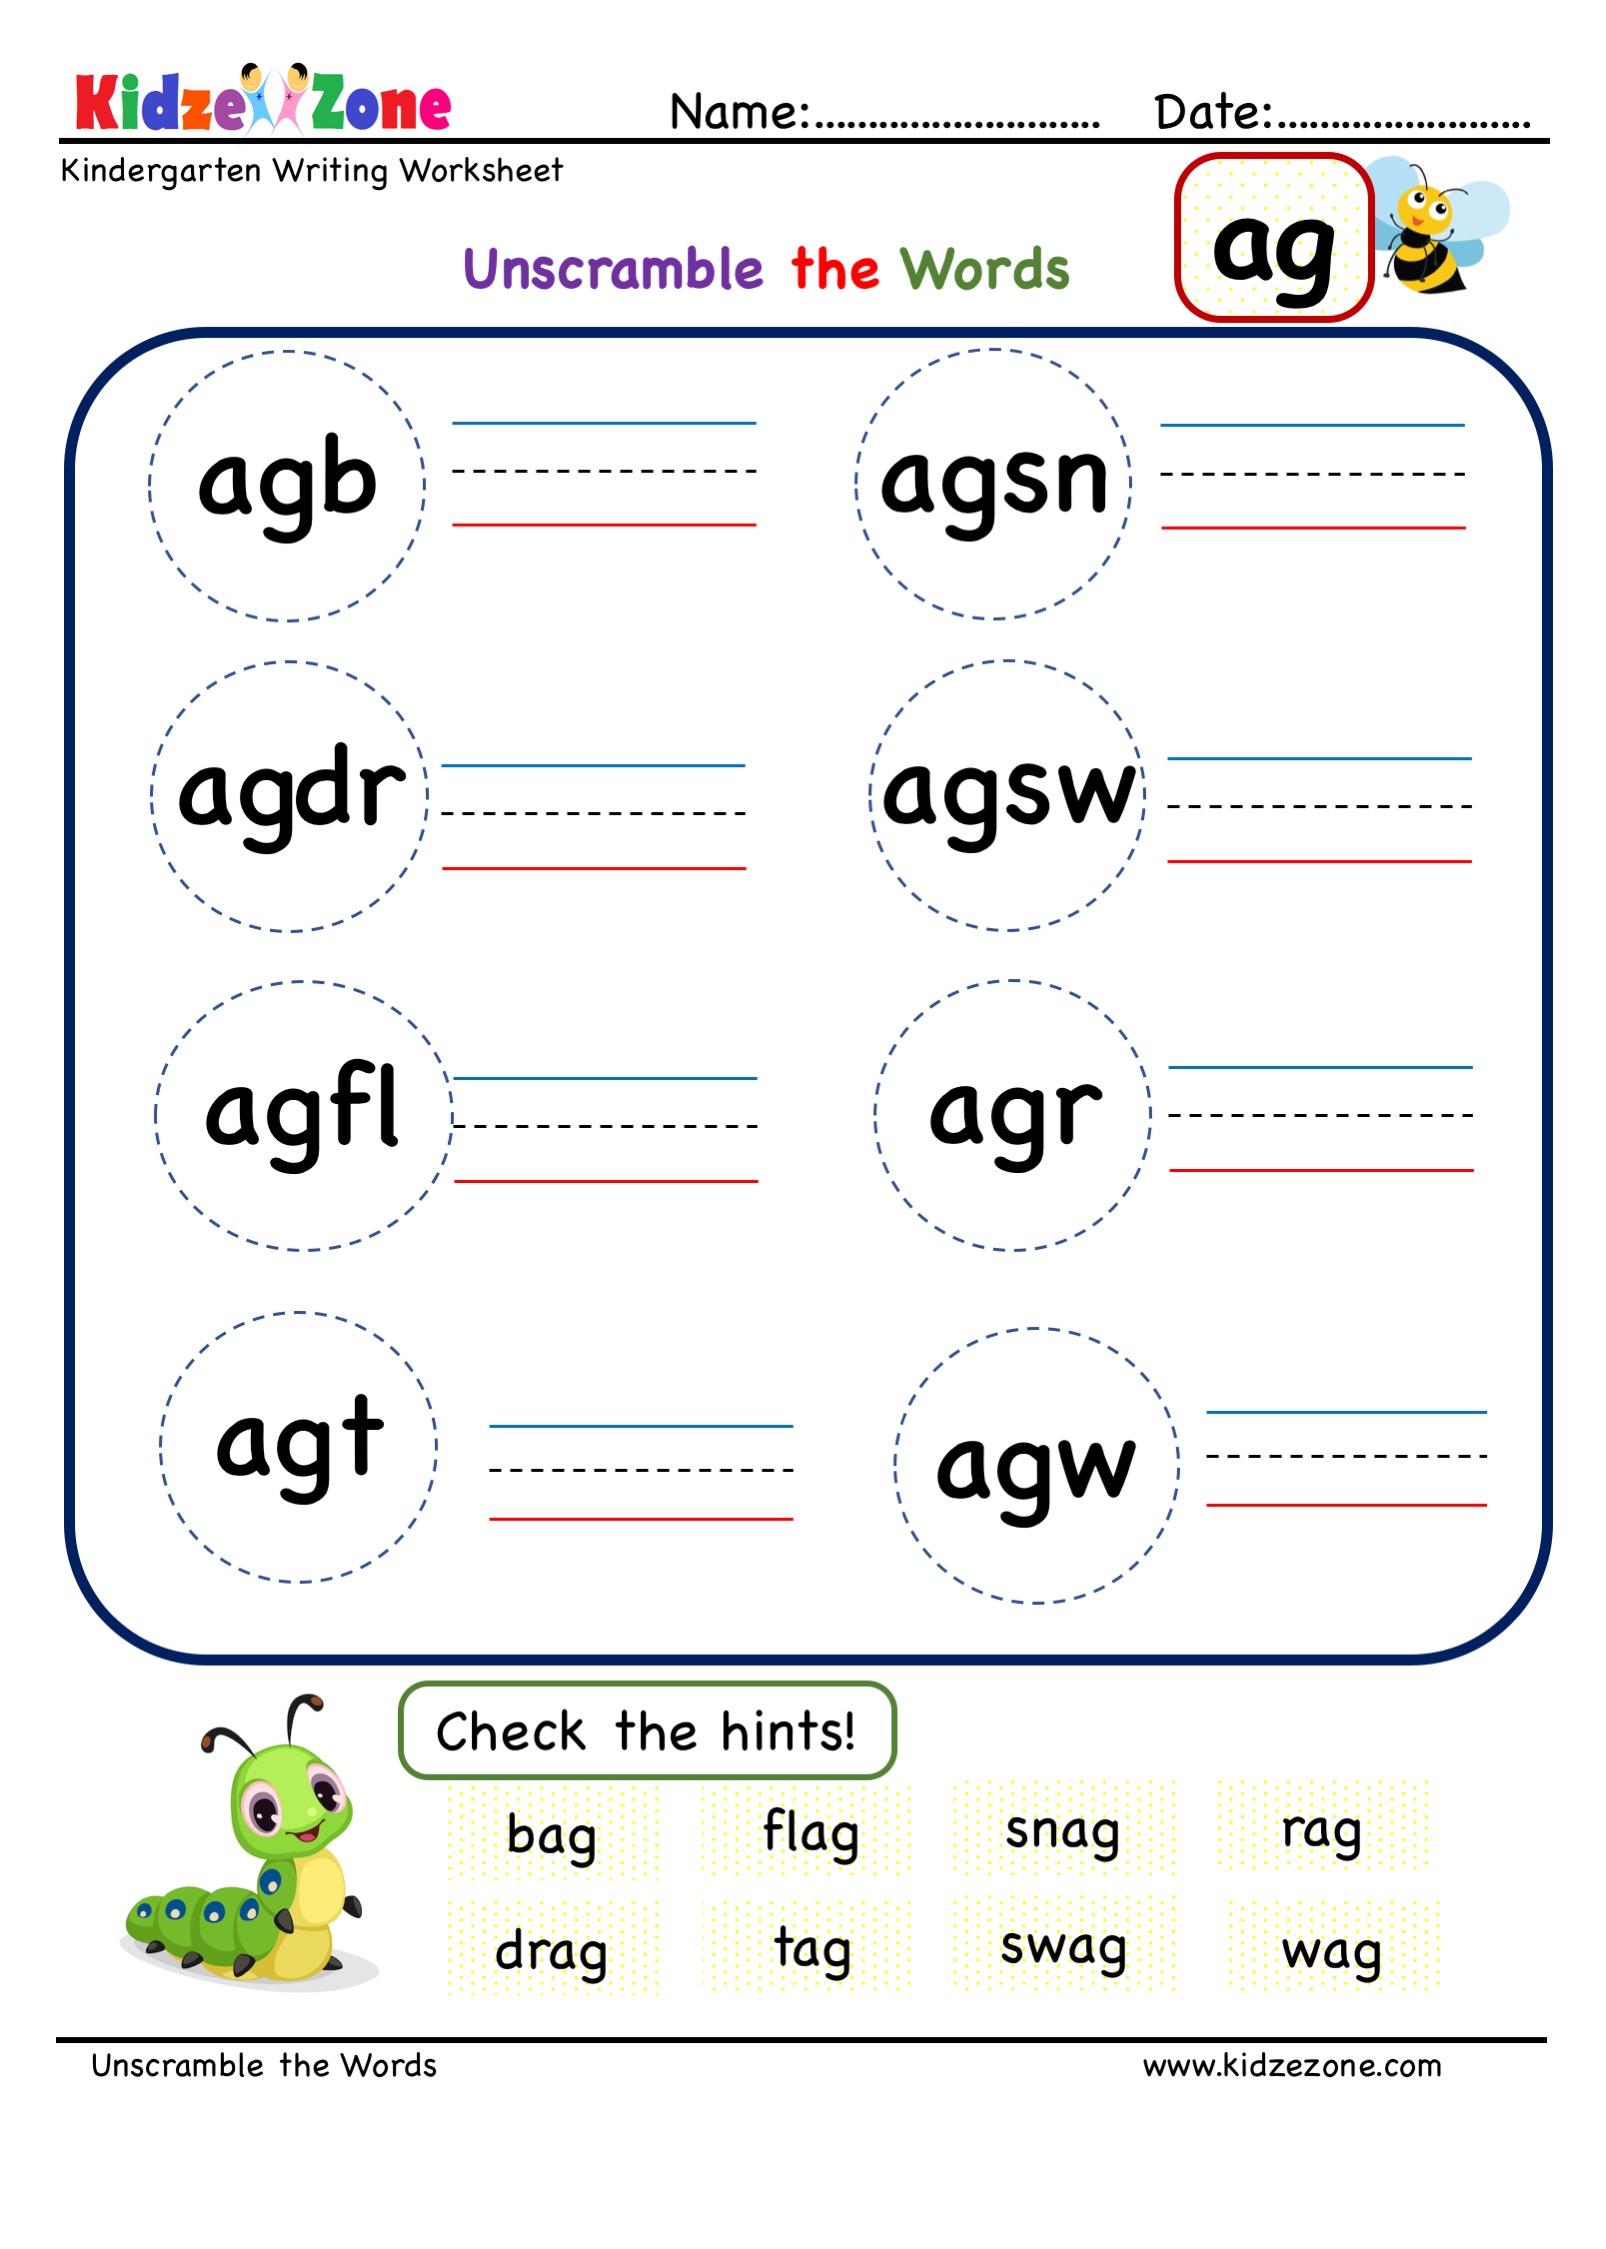 ag-word-family-one-stop-for-reading-writing-and-activity-worksheets